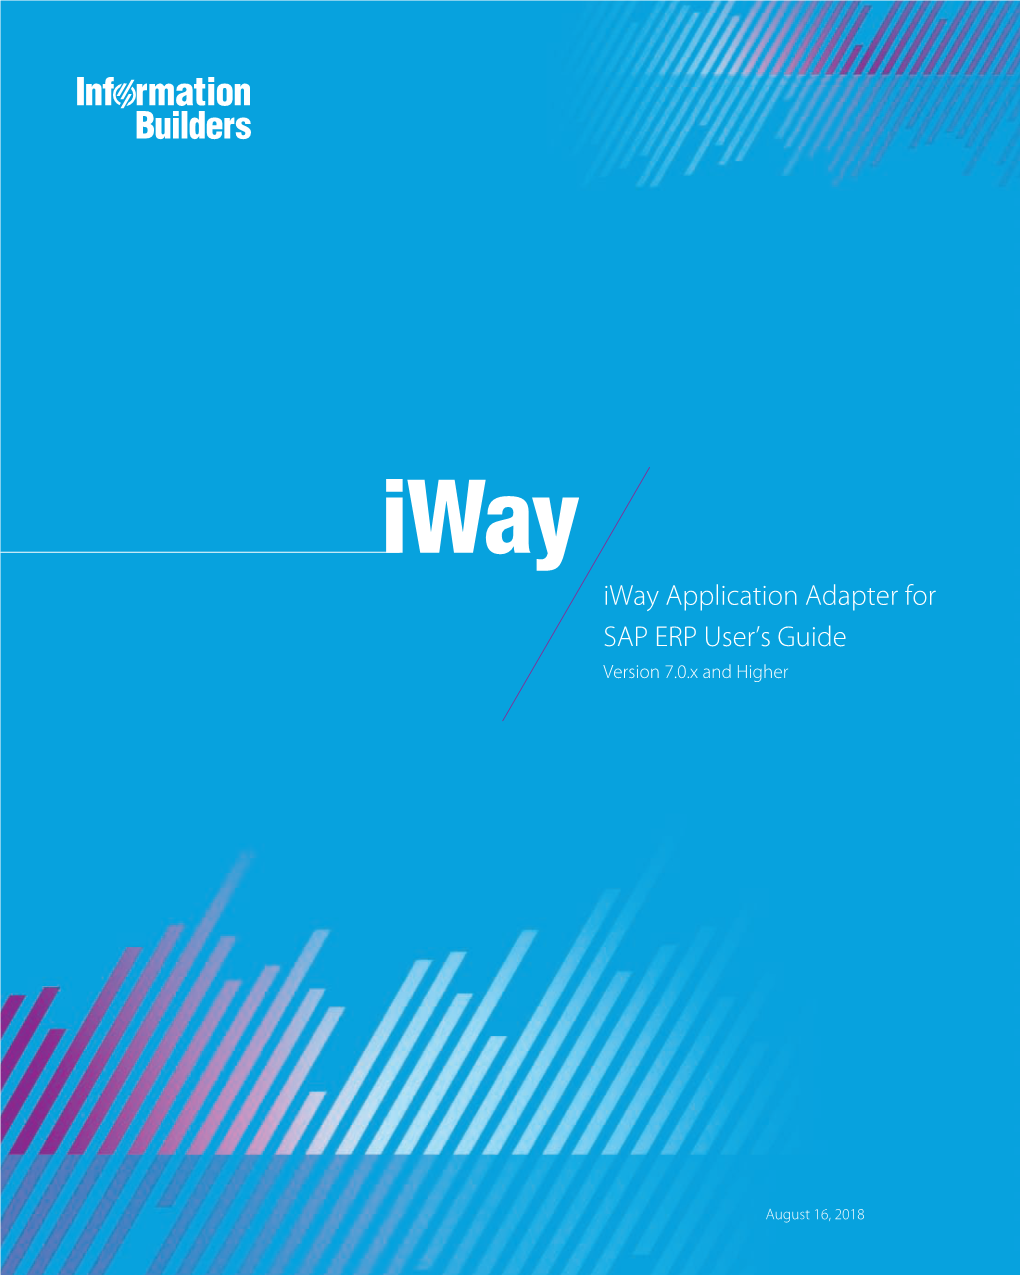 Iway Application Adapter for SAP ERP User's Guide